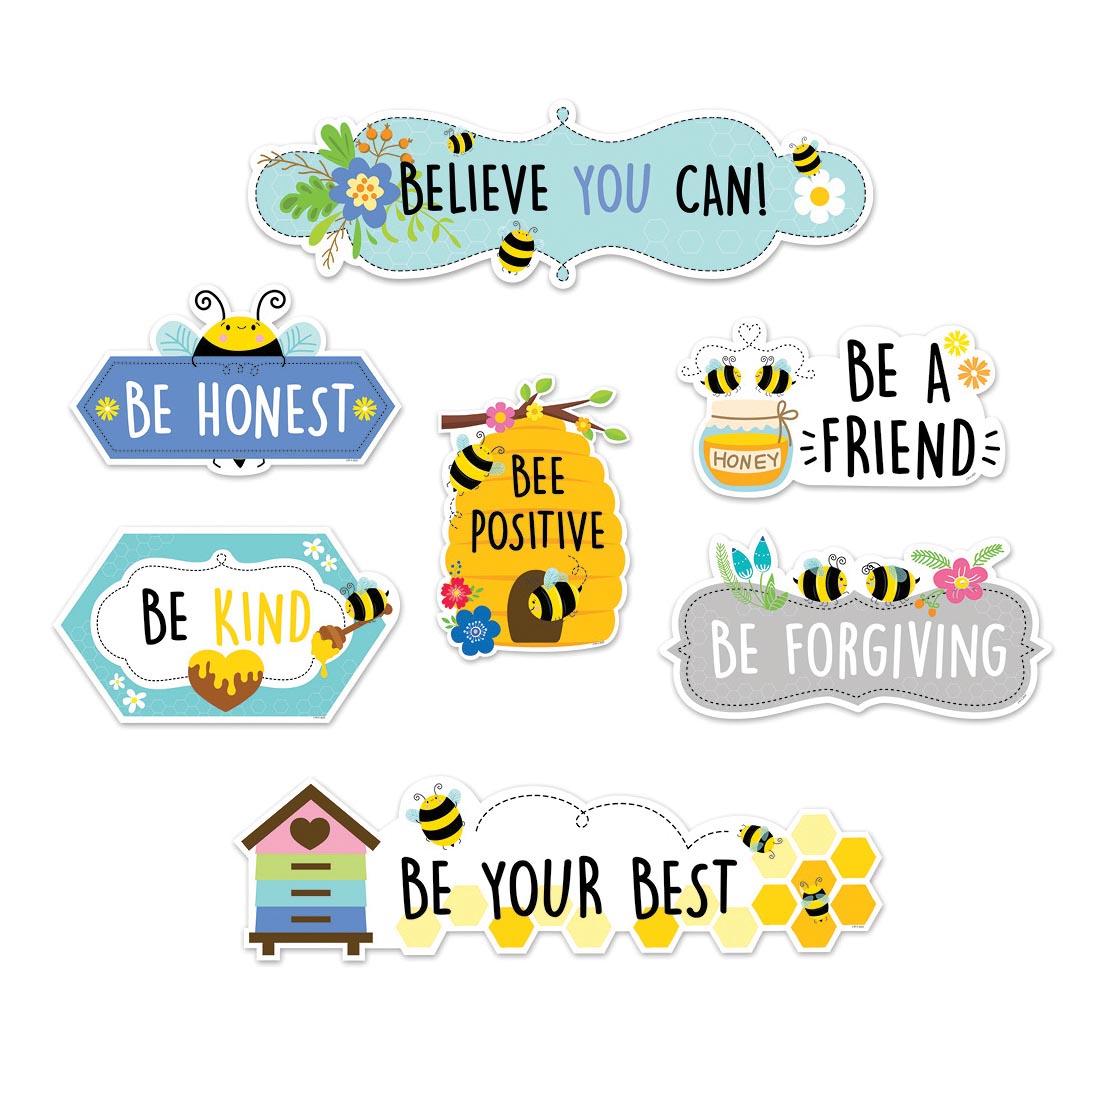 Bee Positive Mini Bulletin Board Set from the Busy Bees Collection By Creative Teaching Press